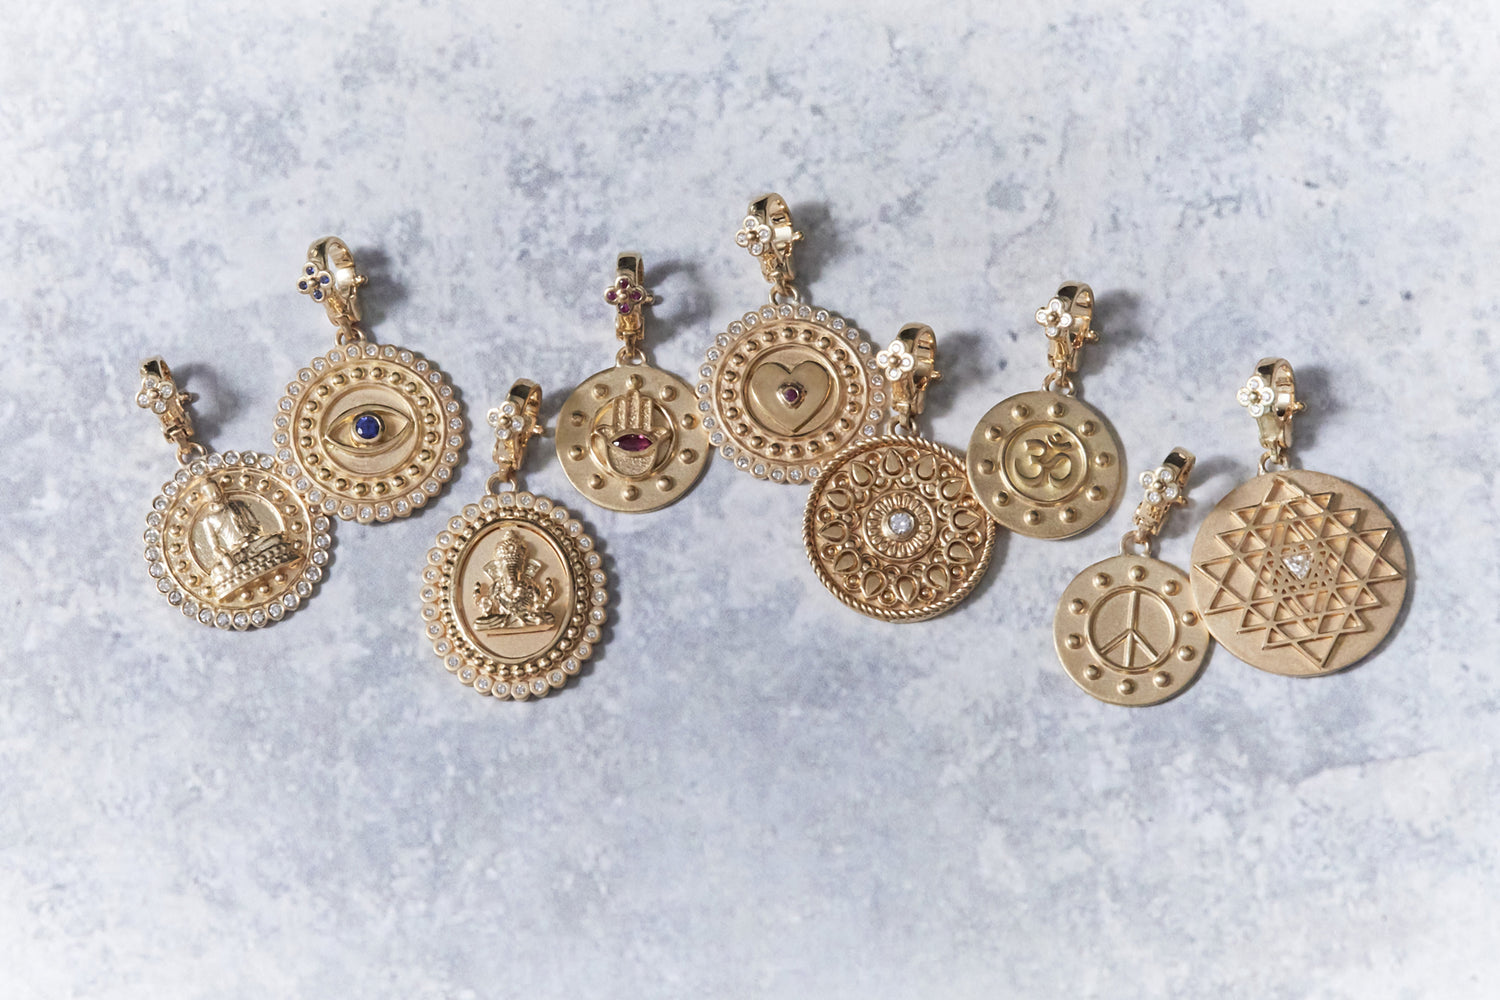 9 pendants that you can put on a charm that represent a meaning